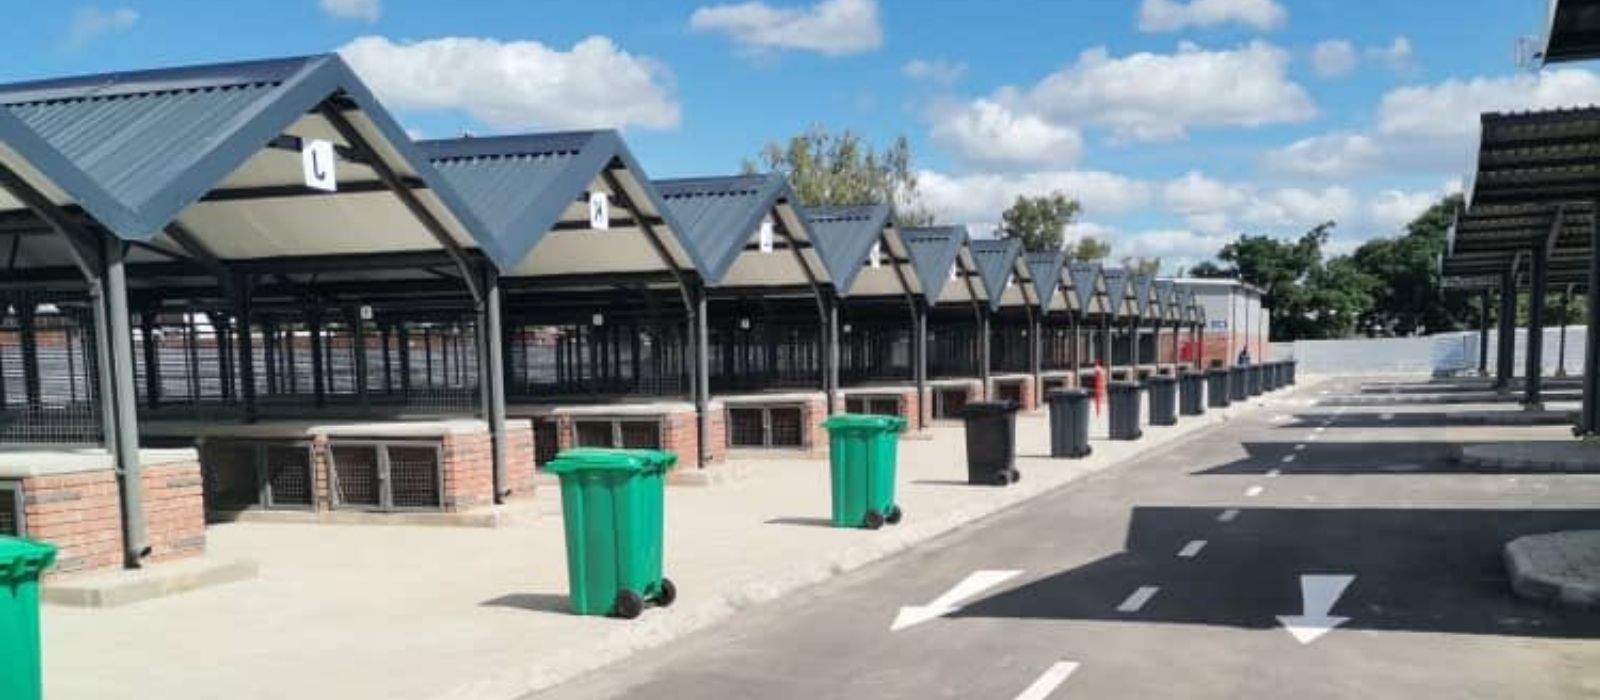 Egodini Rises Again: Bulawayo’s iconic taxi rank reopens after eight years